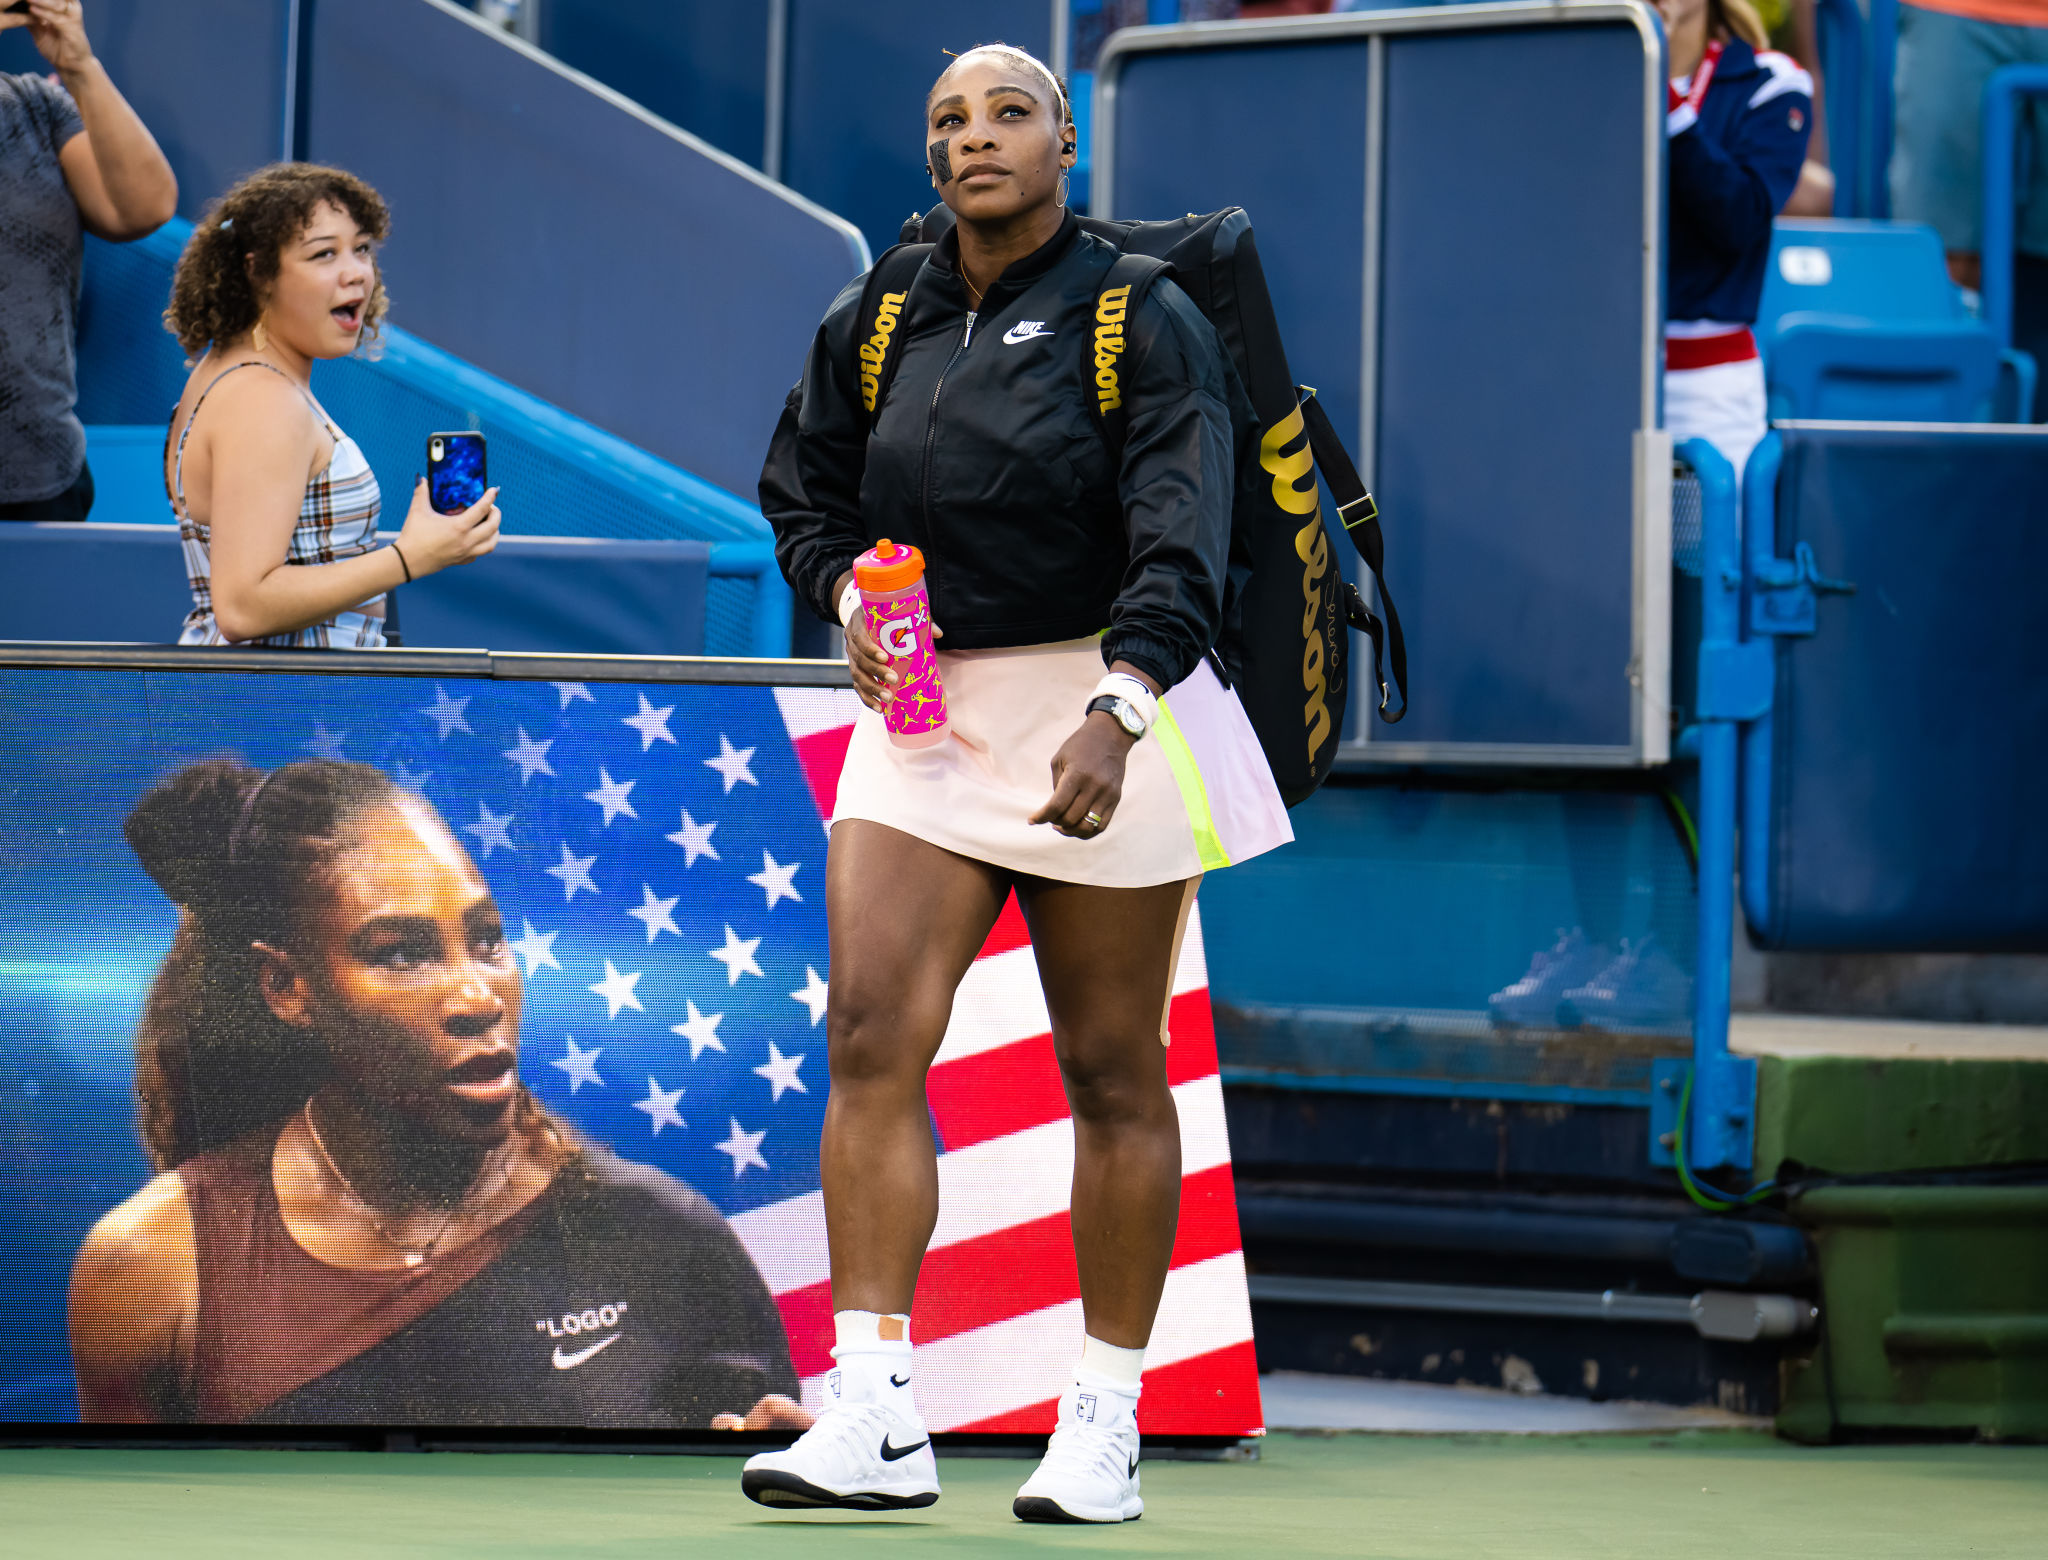 US Open 2022 LIVE: Tennis Queen Serena Williams gets ready for RETIREMENT party at Flushing Meadows but unlikely in happy ending, Check WHY?